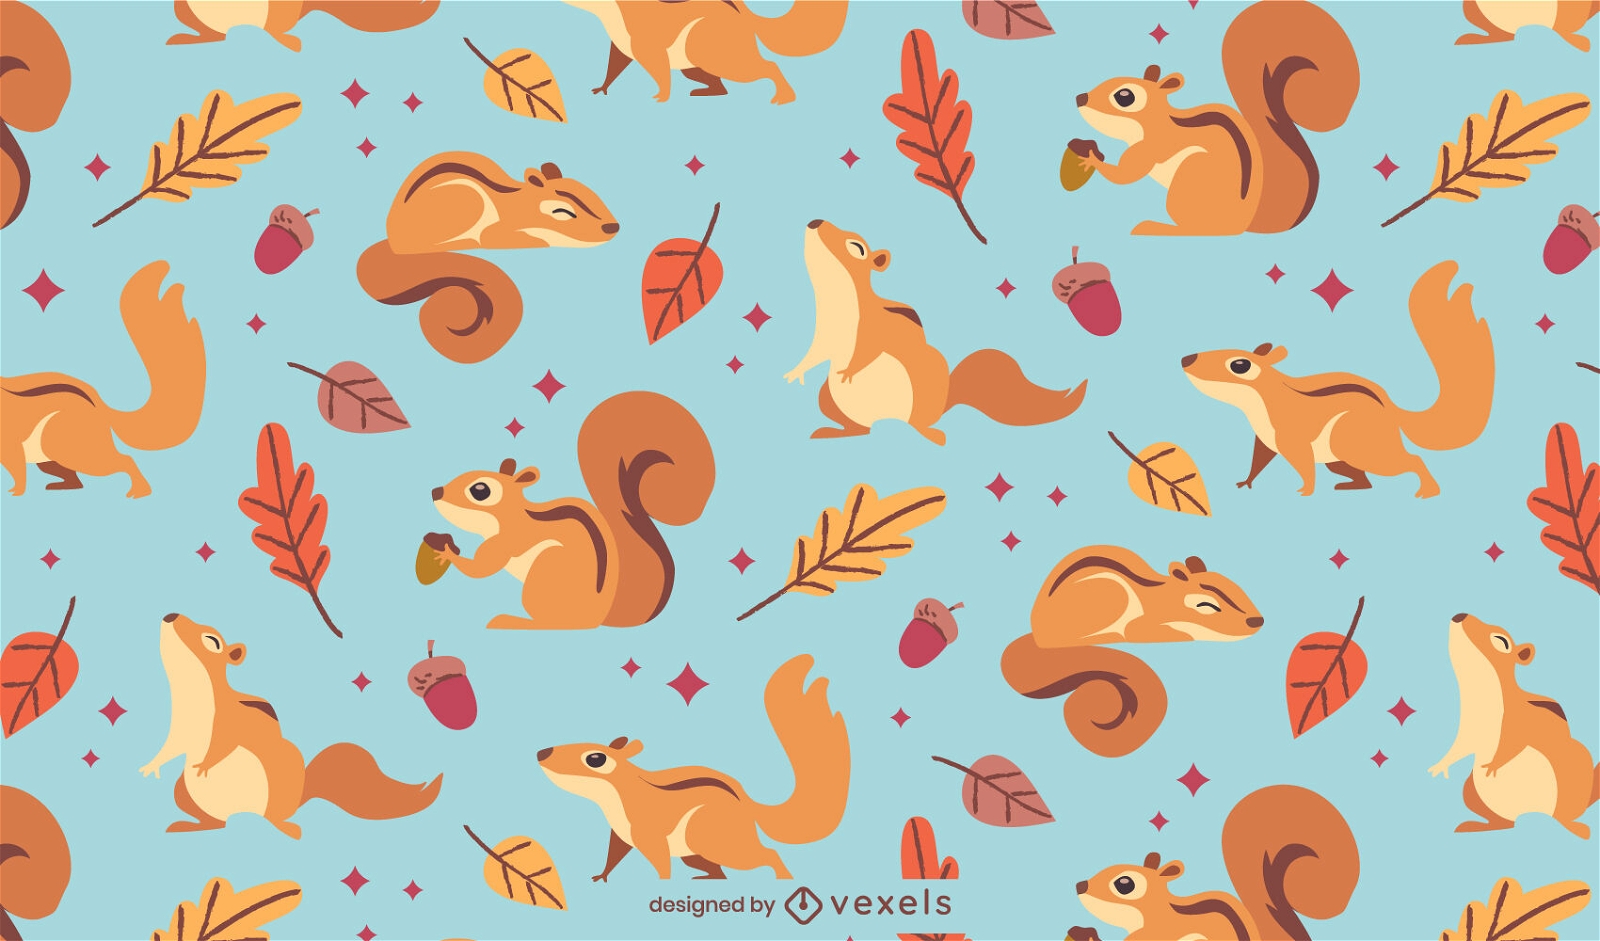 Squirrel with autumn leaves pattern design